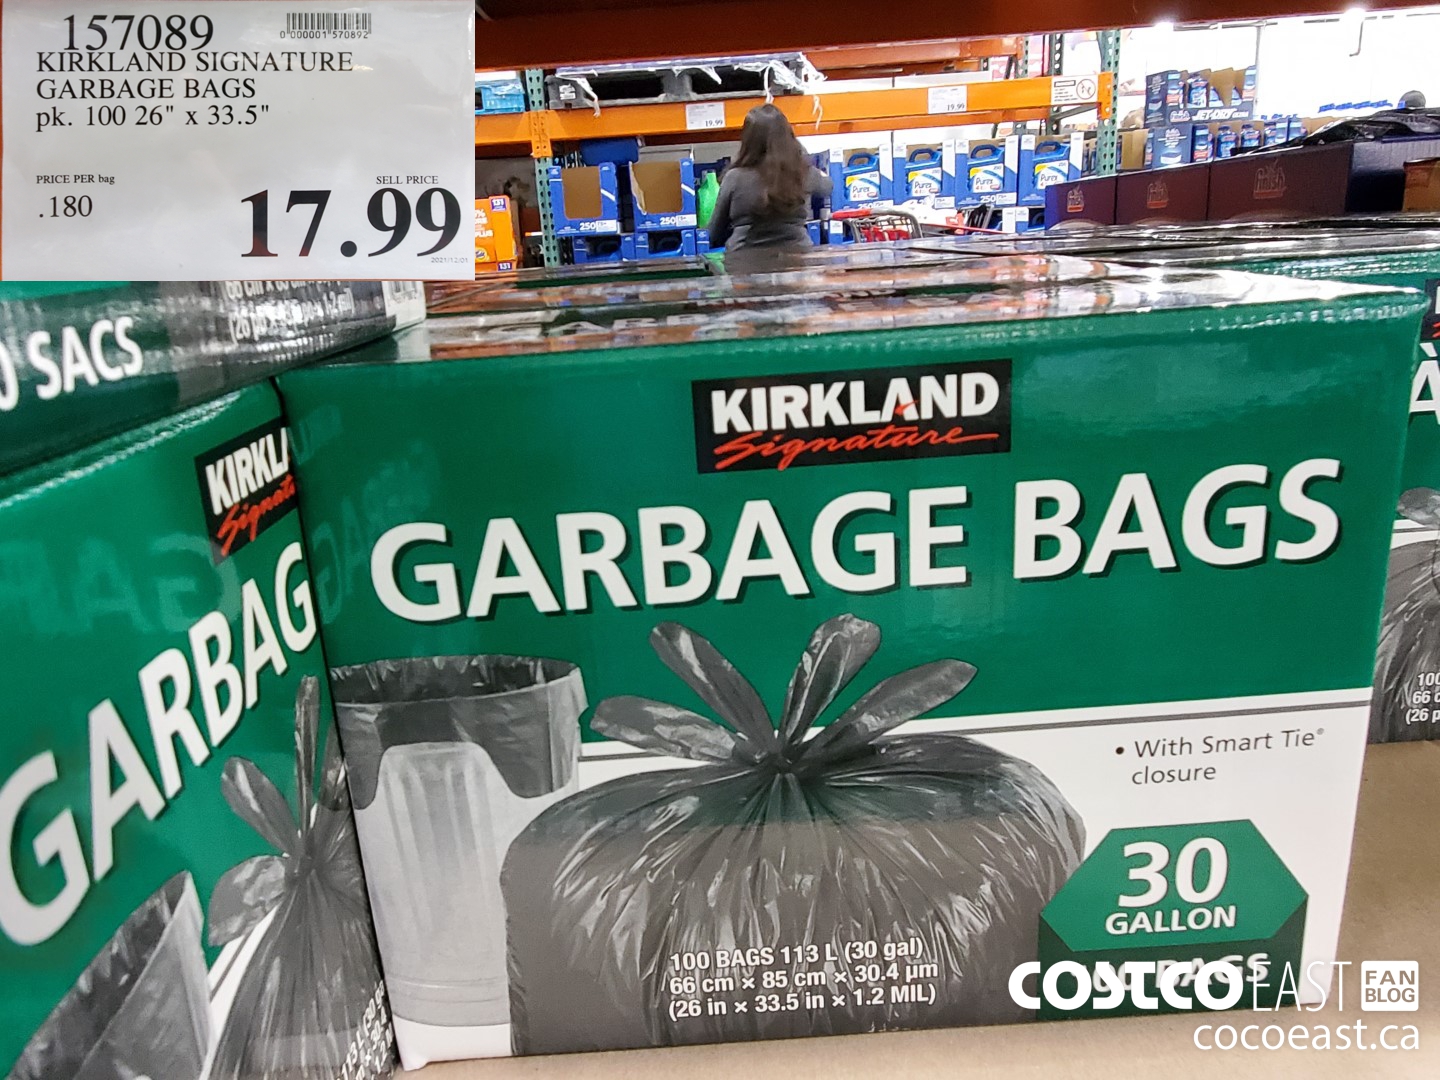 Kirkland Signature Garbage Bags (Pack Of 100/26 X 33.5), 100 Count